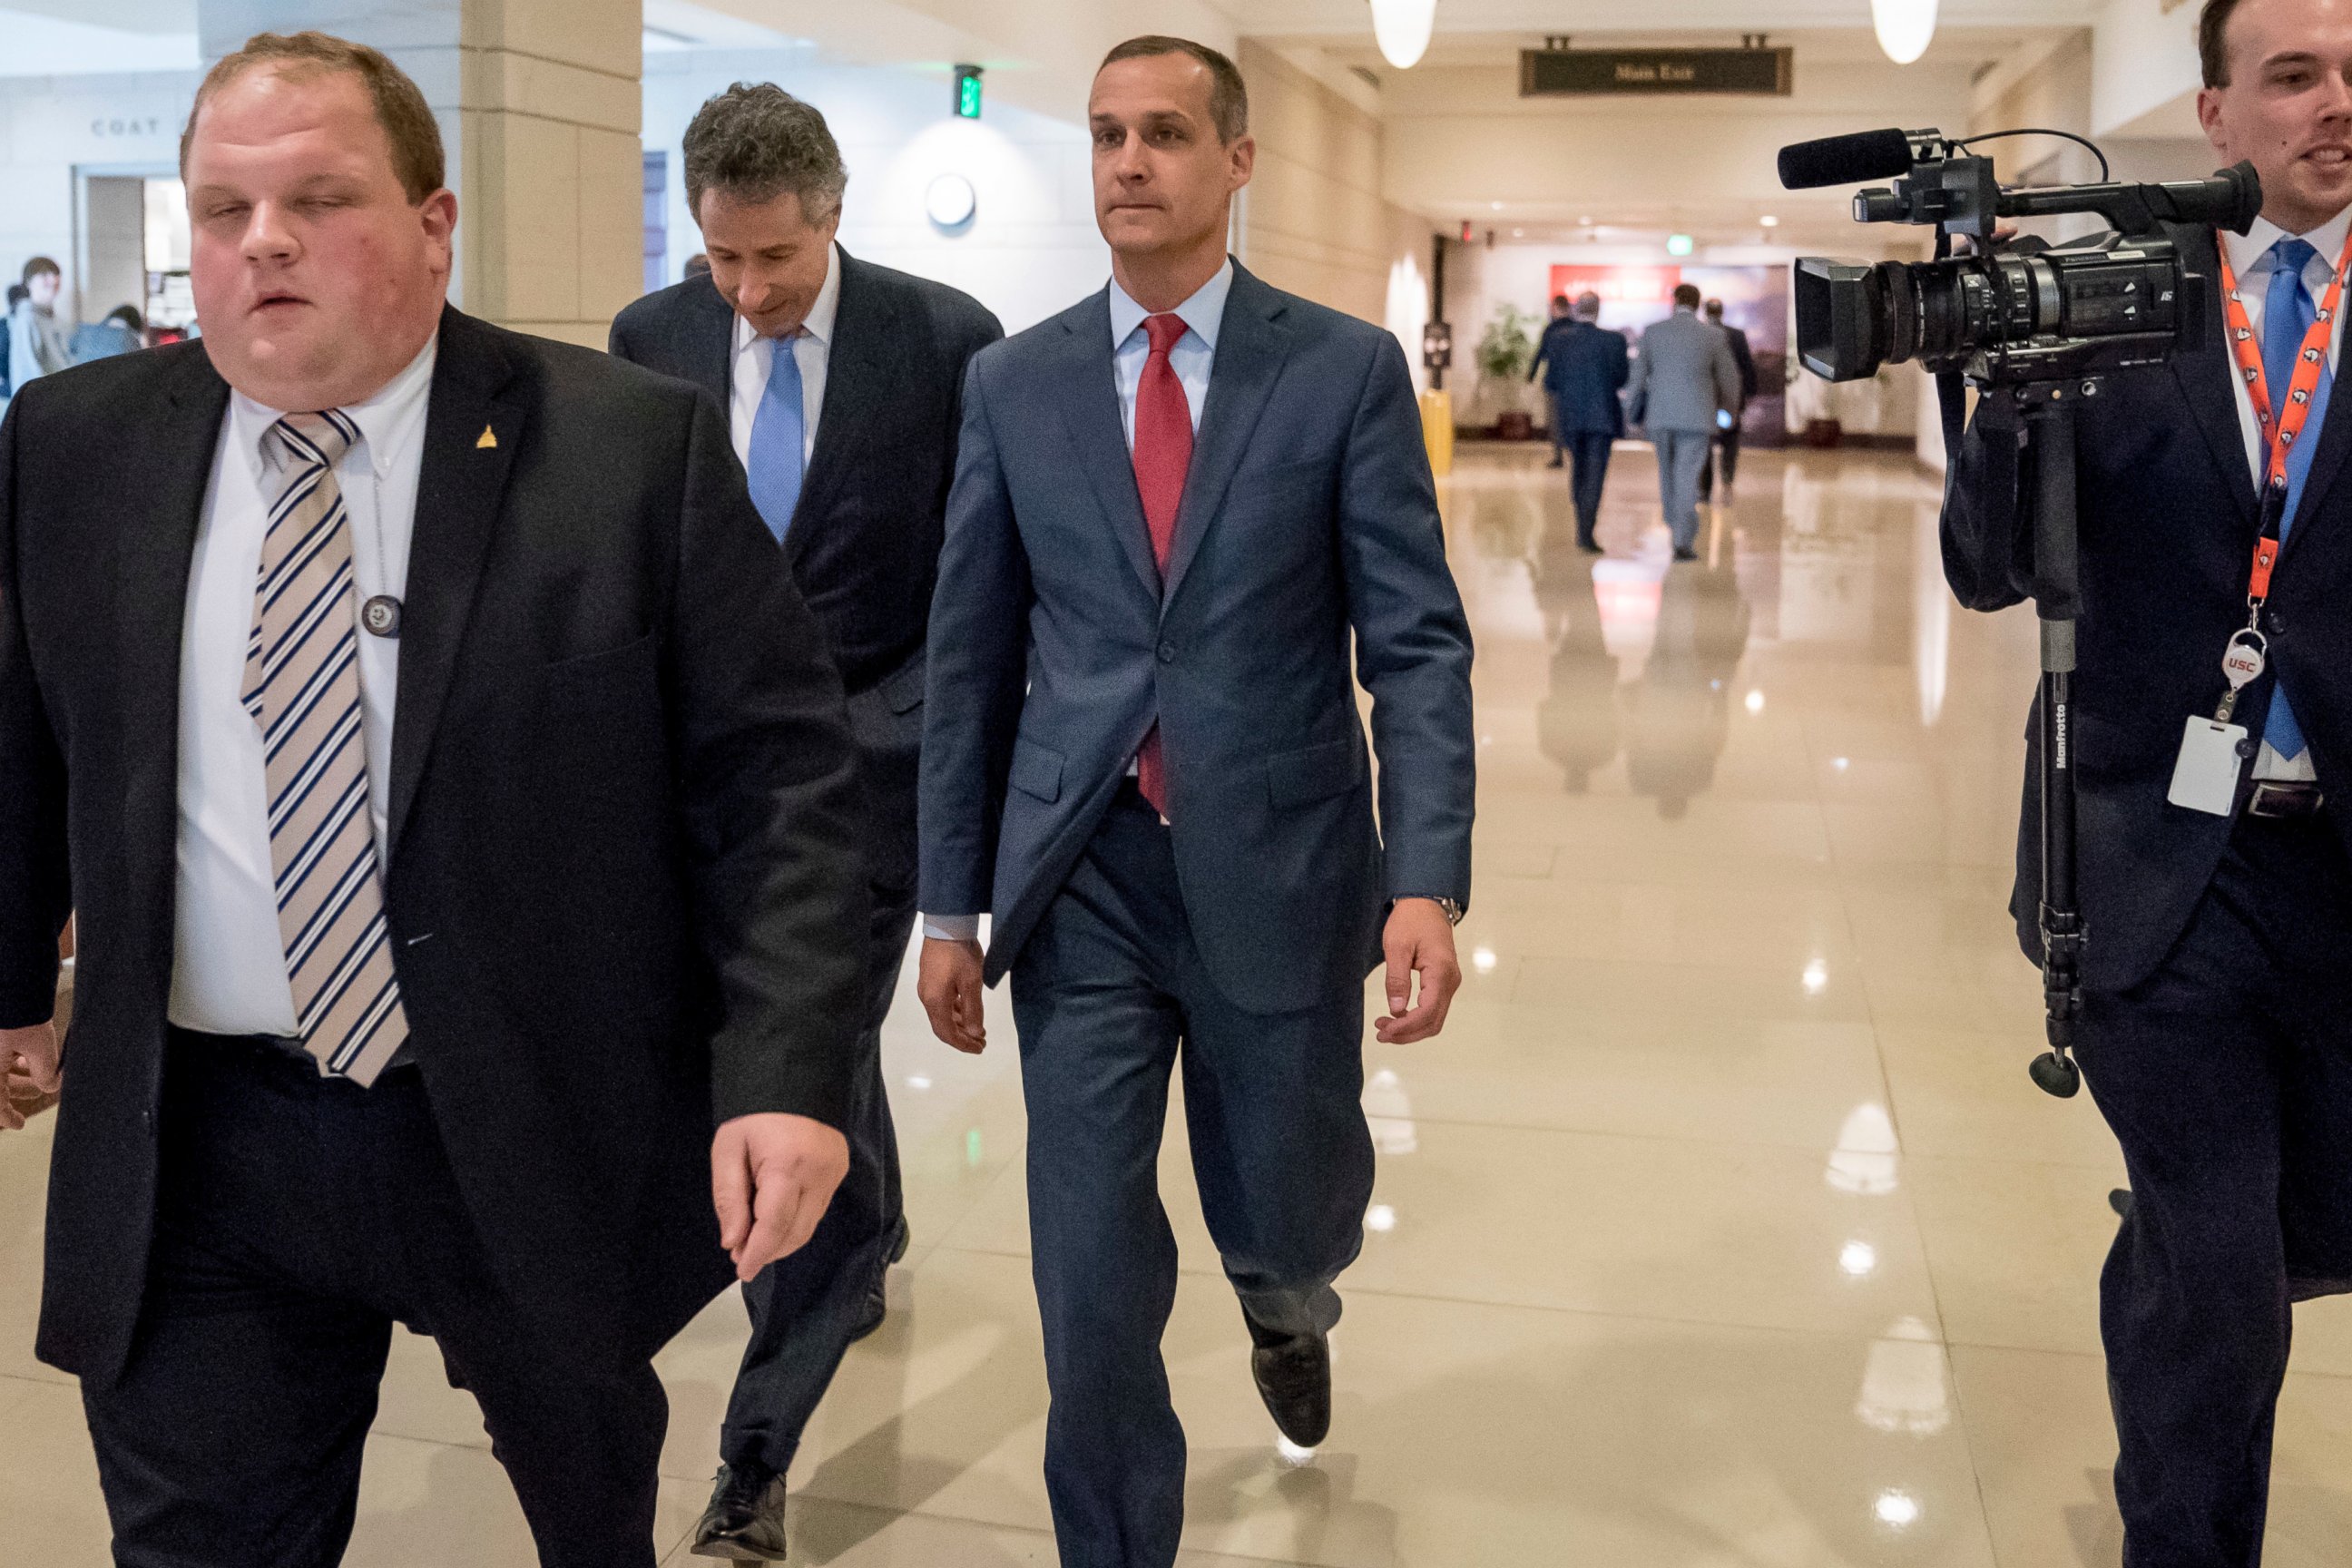 Former Trump campaign manager Cory Lewandowski, center, and his lawyer Peter Chavkin, second from left, arrive to meet behind closed doors with the House Intelligence Committee, at the Capitol in Washington, Thursday, March 8, 2018.